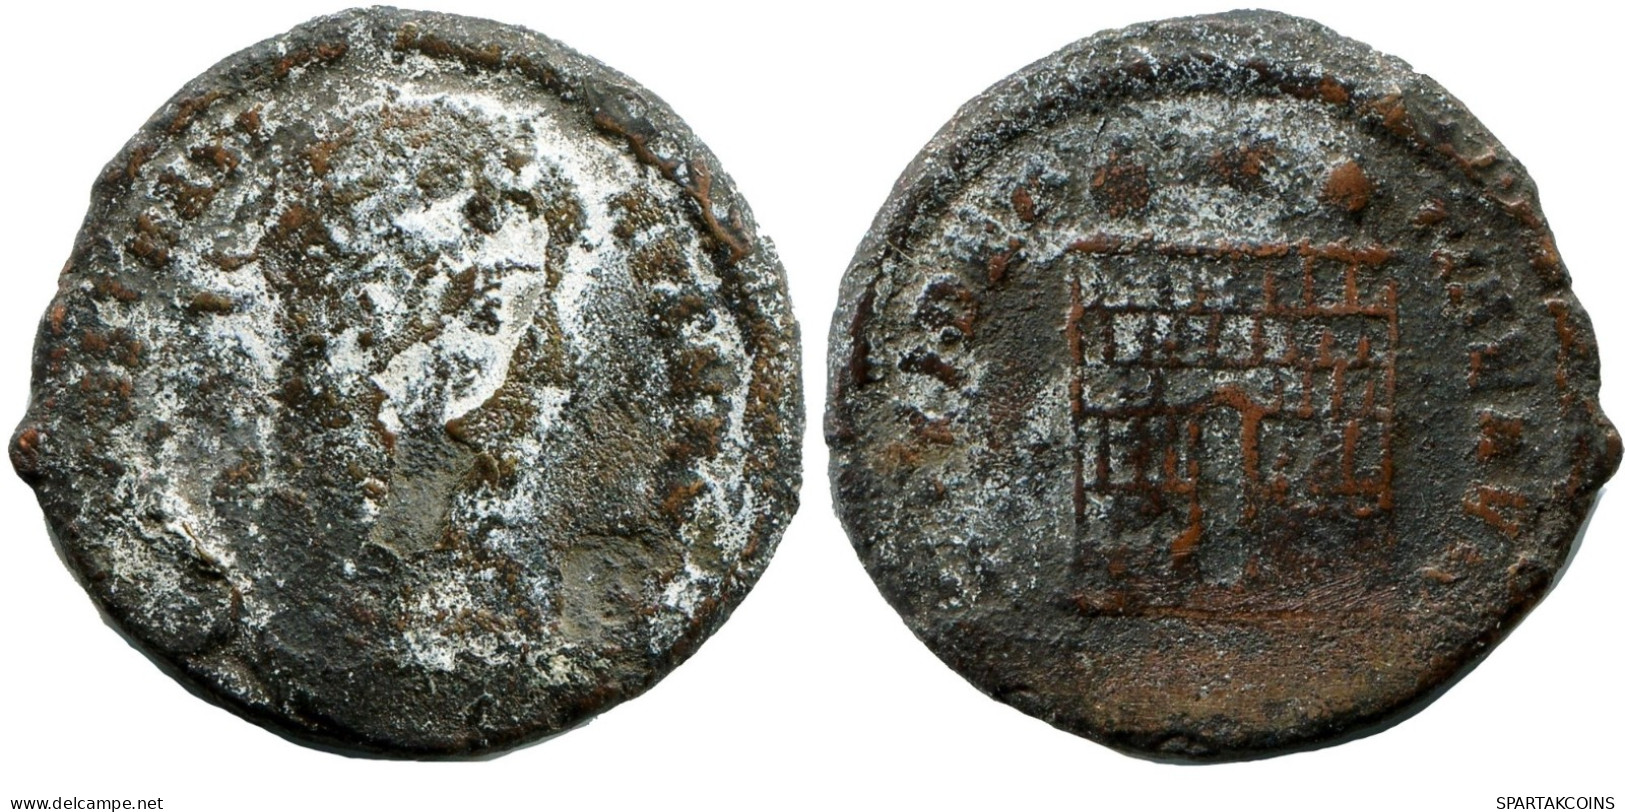 CONSTANTINE I MINTED IN CYZICUS FOUND IN IHNASYAH HOARD EGYPT #ANC10979.14.E.A - The Christian Empire (307 AD To 363 AD)